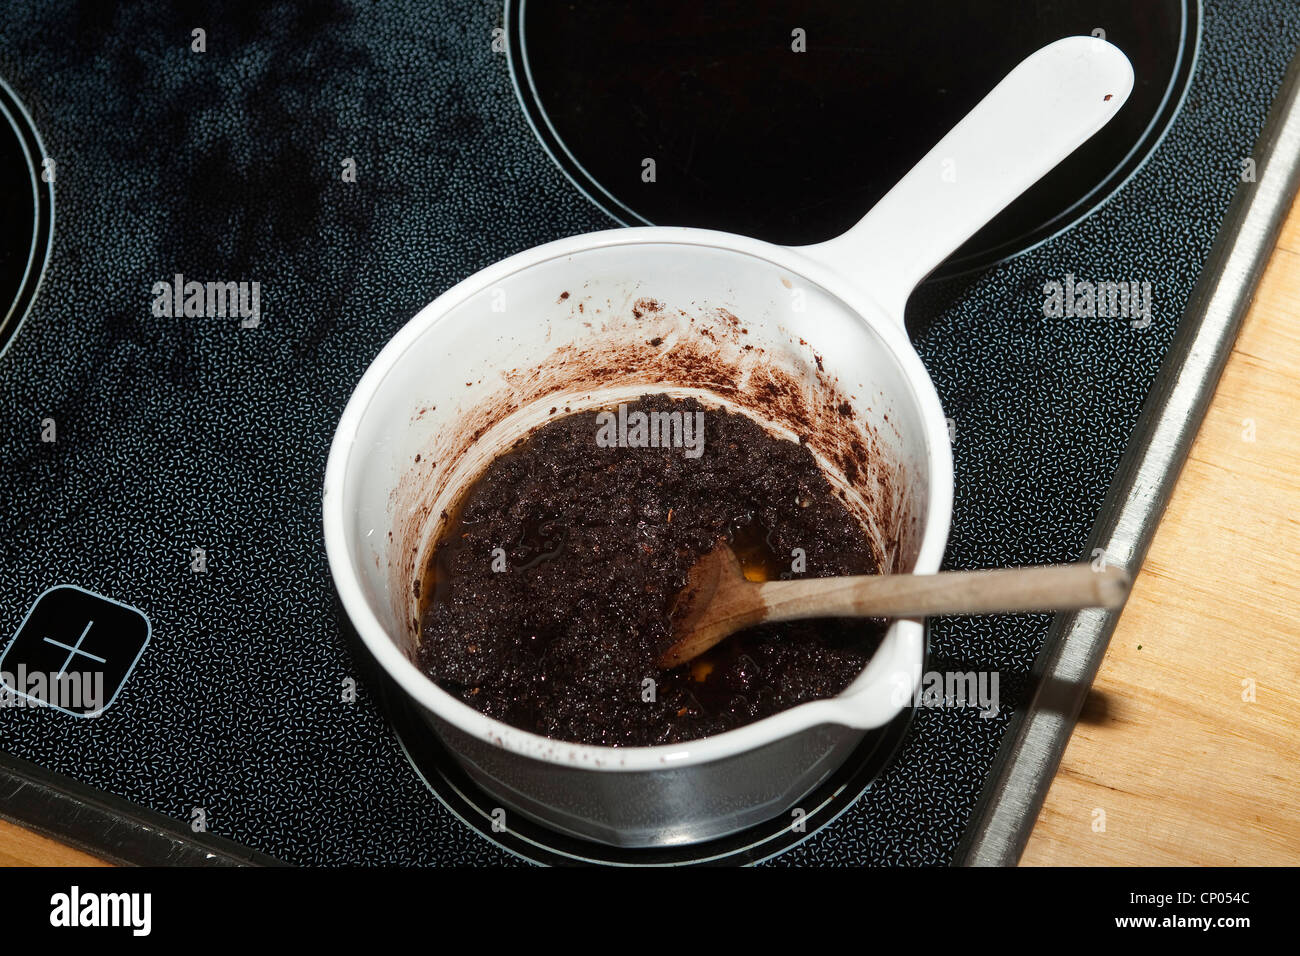 Common hazel (Corylus avellana), self-collected and milled hazelnuts, cocoa powder, butter and sugar stirred in a pot on the stove for making chocolate spread, Germany Stock Photo